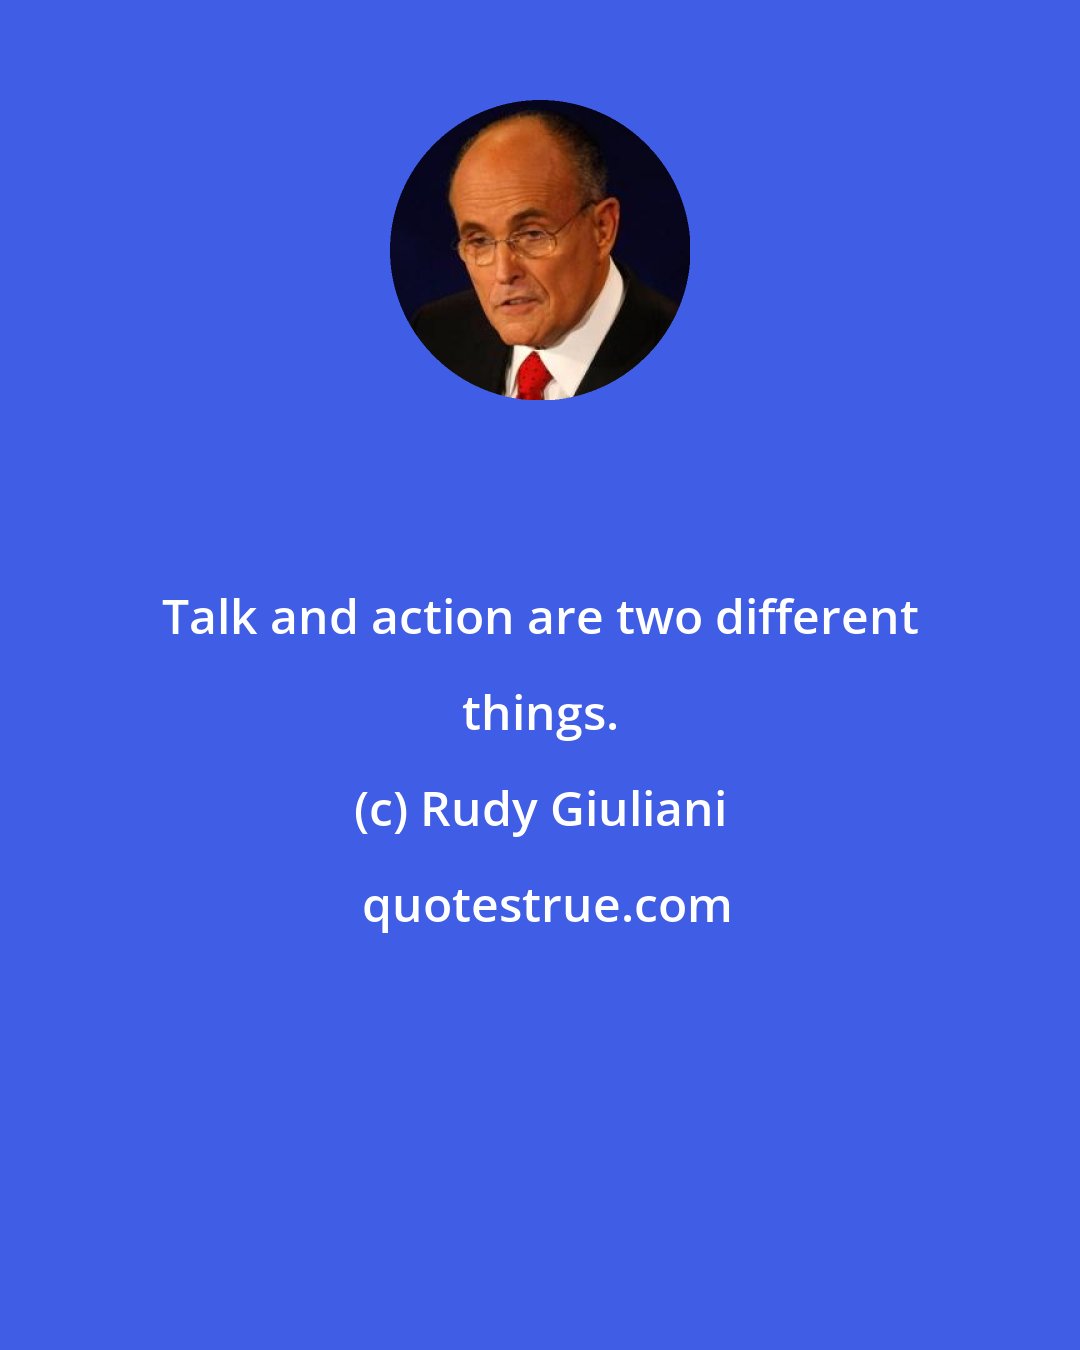 Rudy Giuliani: Talk and action are two different things.